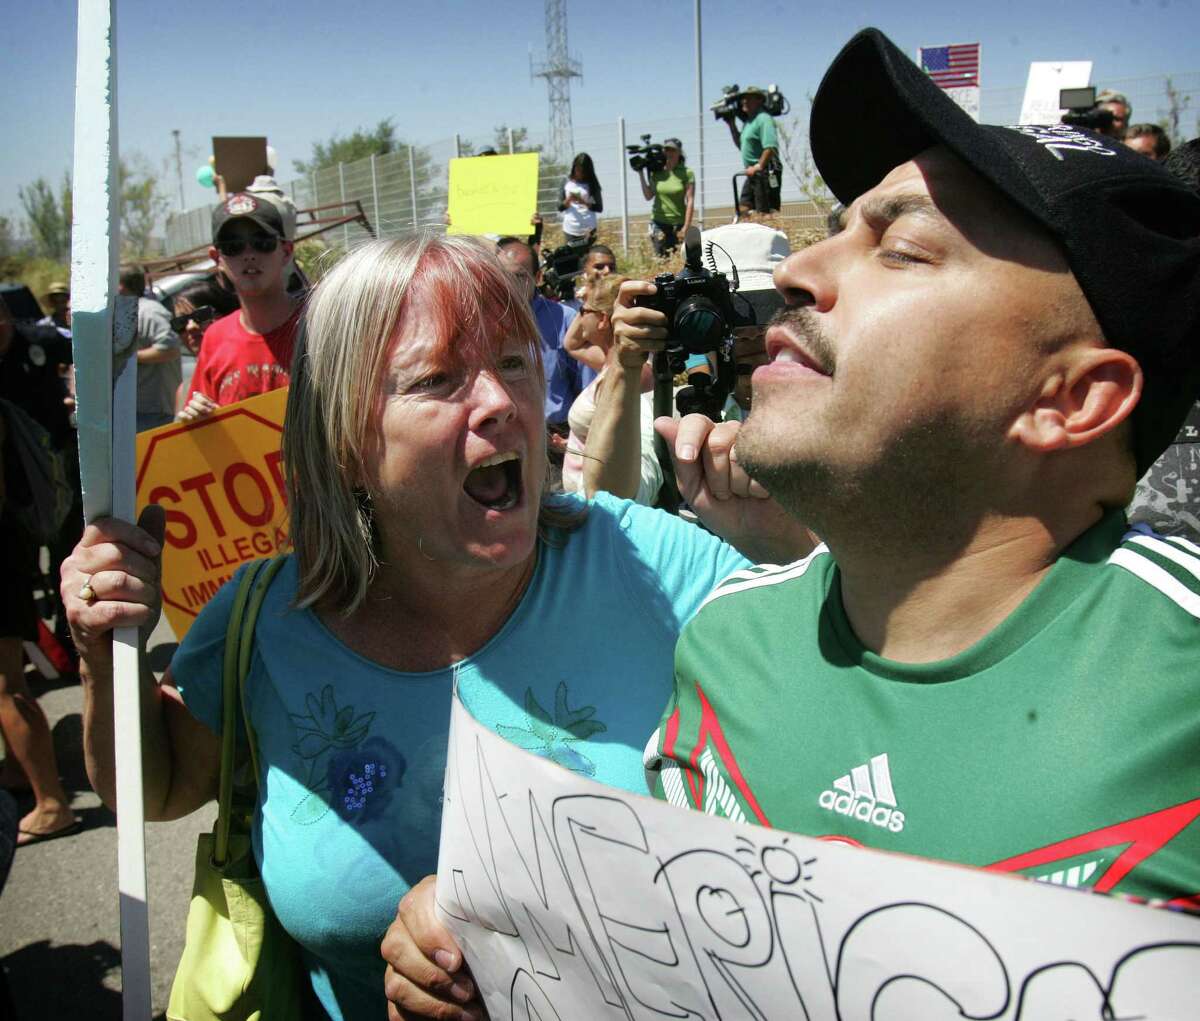 An unidentified protester (left) shouts at Lupillo Rivera, an American, as buses carrying immigrants attempt to enter Murrieta, Calif. Will she eventually apologize?